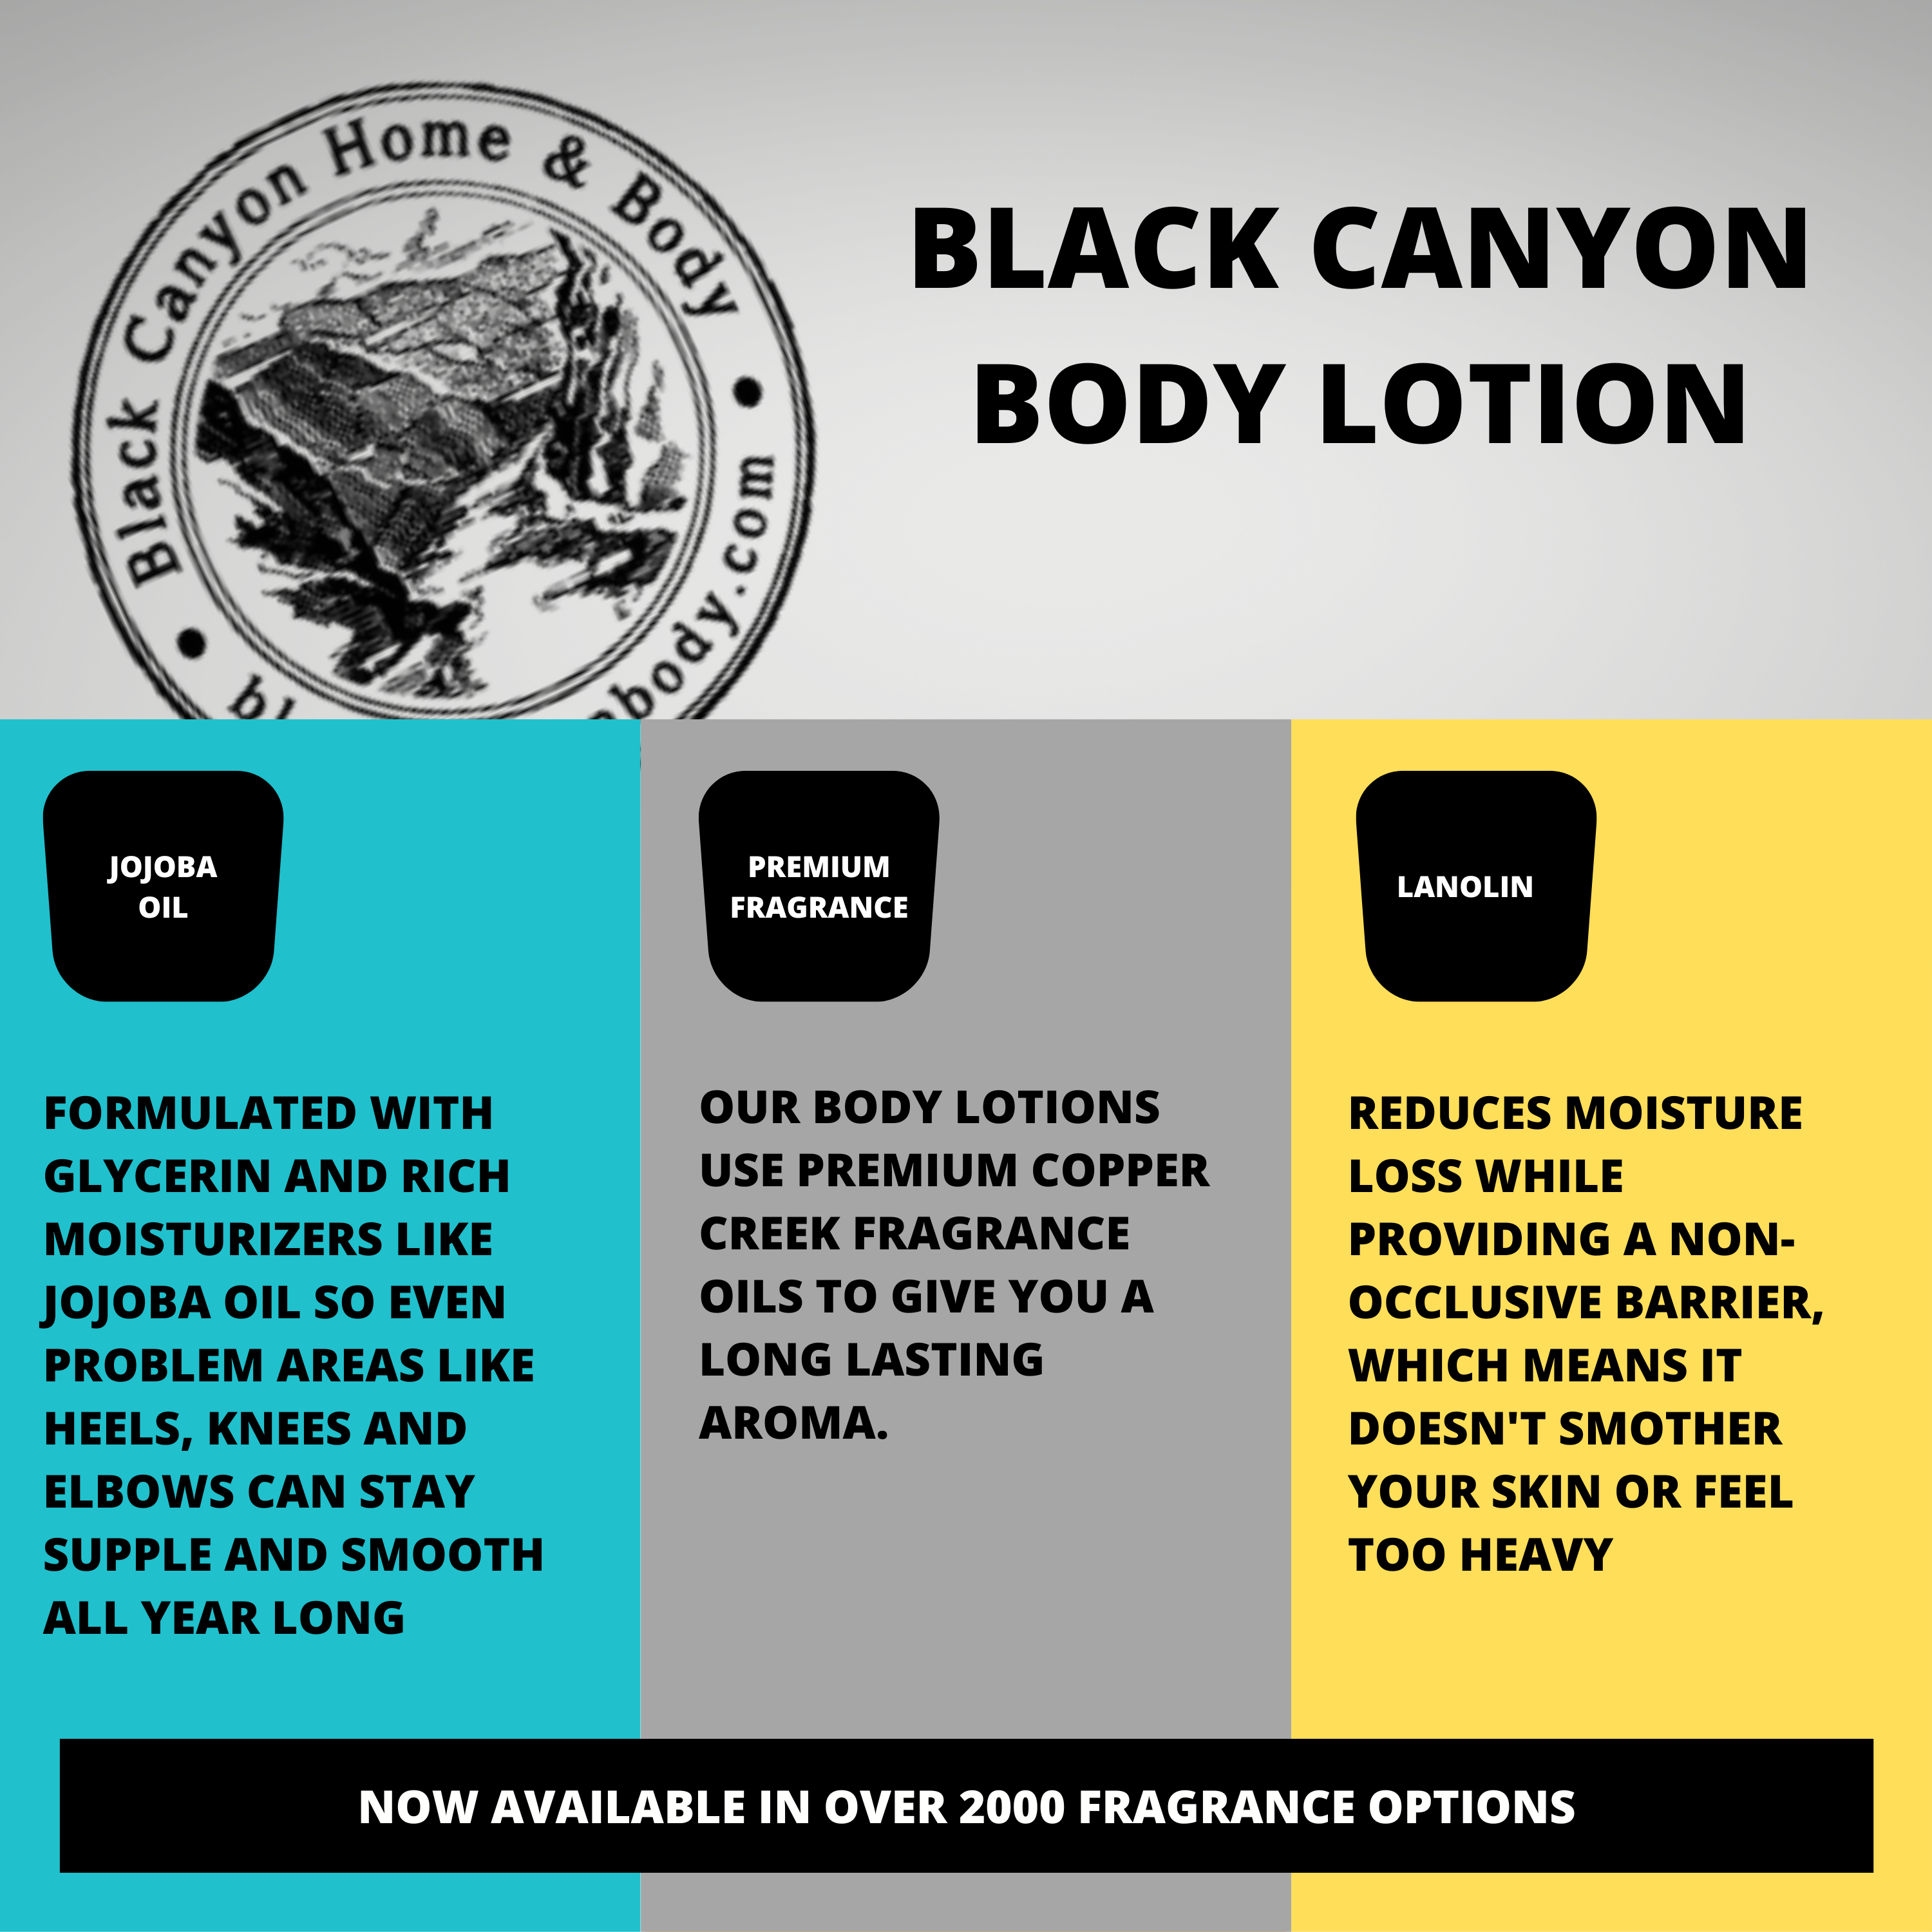 Black Canyon Secret Lover Scented Luxury Body Lotion with Lanolin and Jojoba Oil